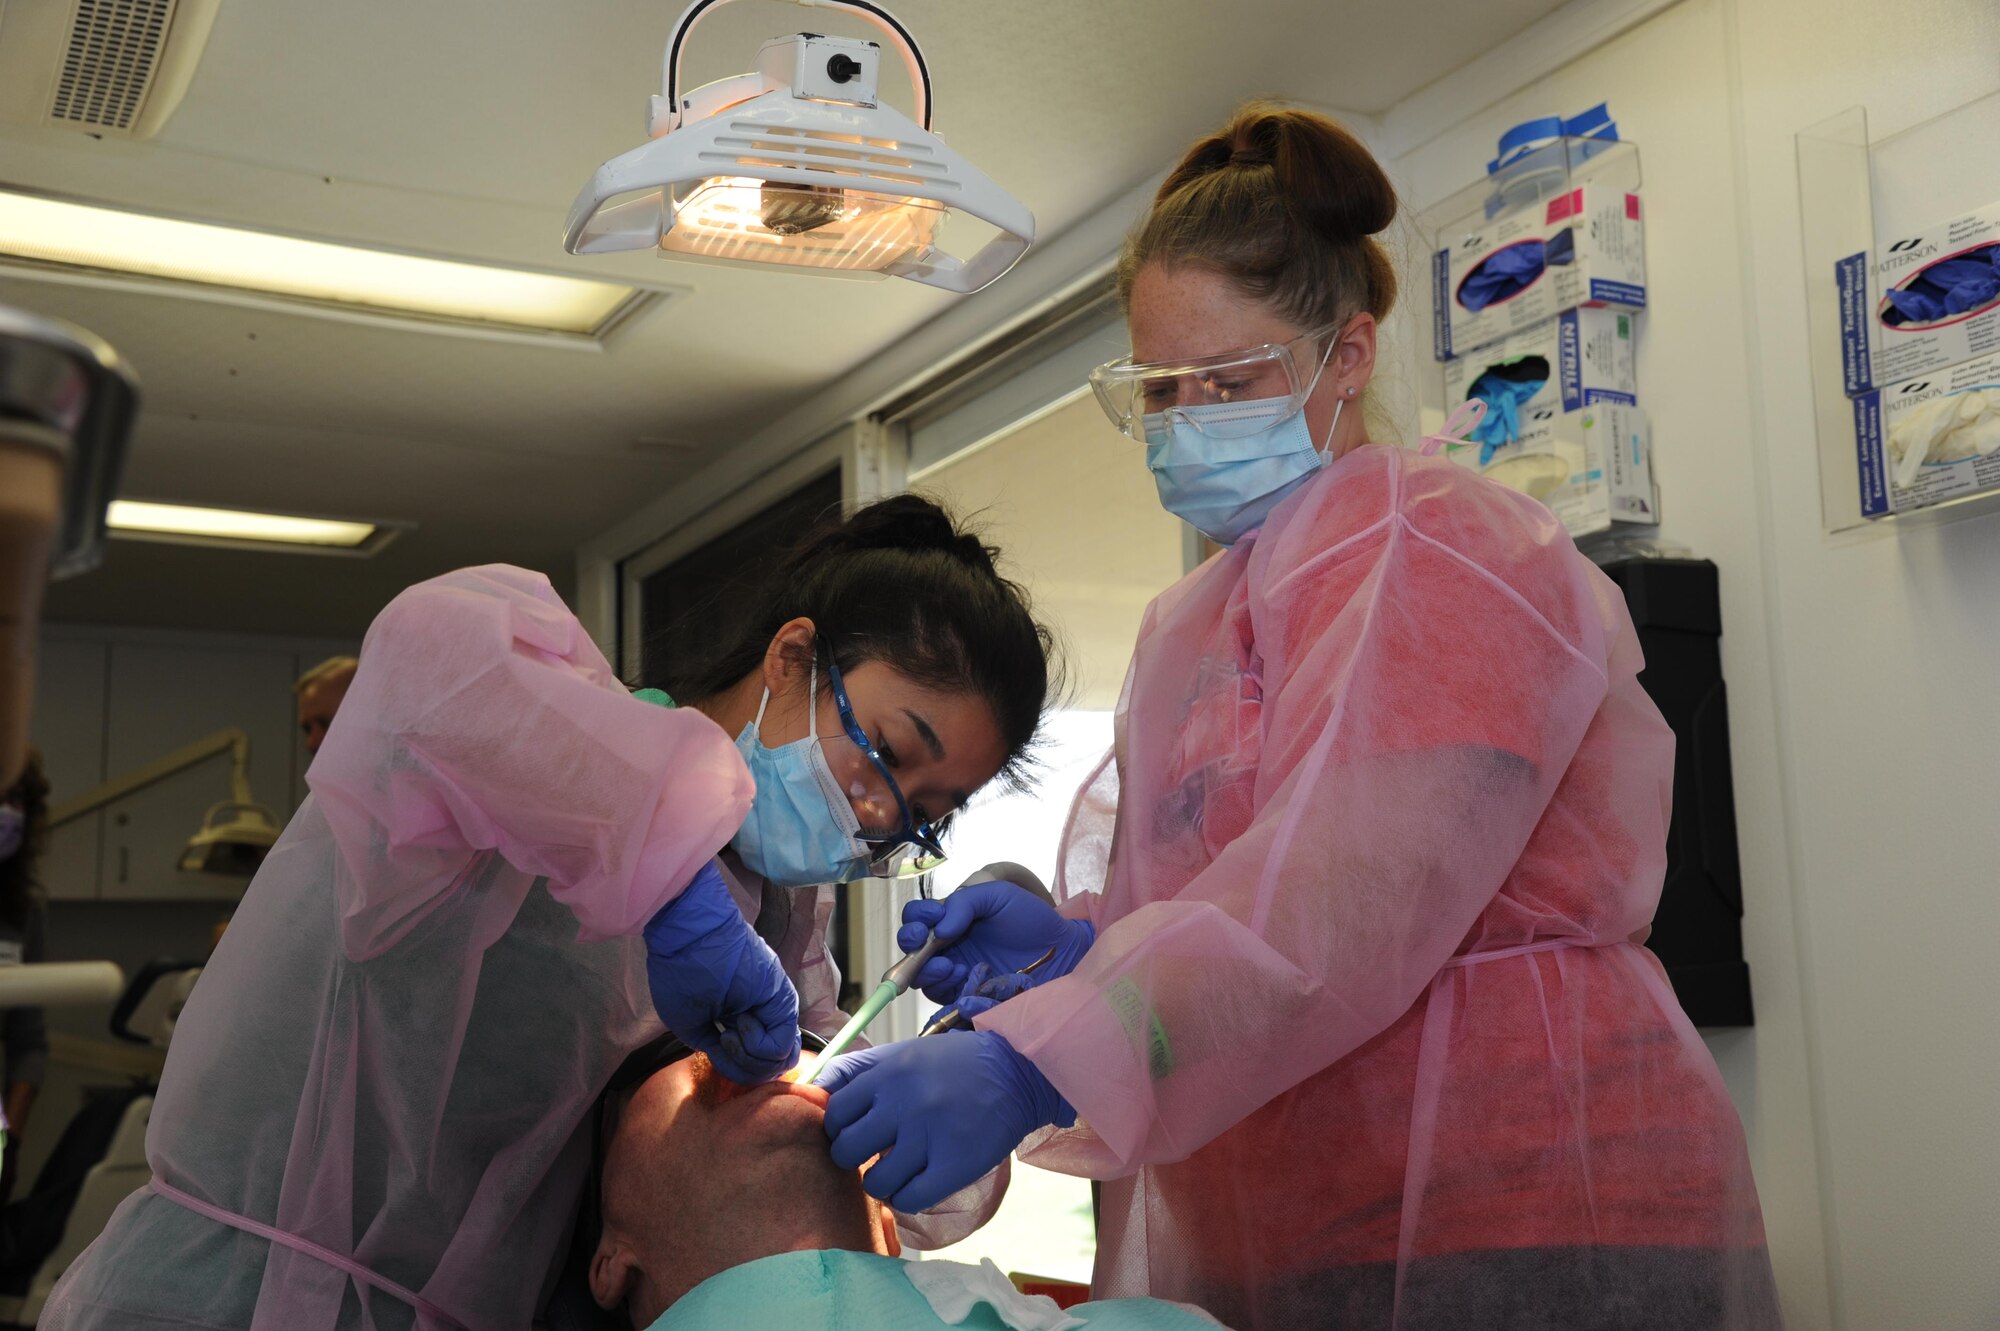 Staff. Sgt. Sharon Palmer, (on right) dental assistant, 6 Air Mobility Wing, MacDill Air Force Base along with Maj. Elizabeth Ho, 927th Aerospace Medical Squadron, D.M.D provide dental care during Operation Stand Down, an event designed to help local homeless veterans combating life on the streets. The event, held at the Veteran Memorial Park, Hudson, Florida, bussed in homeless veterans from surrounding areas to take advantage of the more than a dozen complimentary services, such as employment workshops, hot meals, hot showers and haircuts, and medical services. (U.S. Air Force photo by Tech. Sgt. Peter Dean)